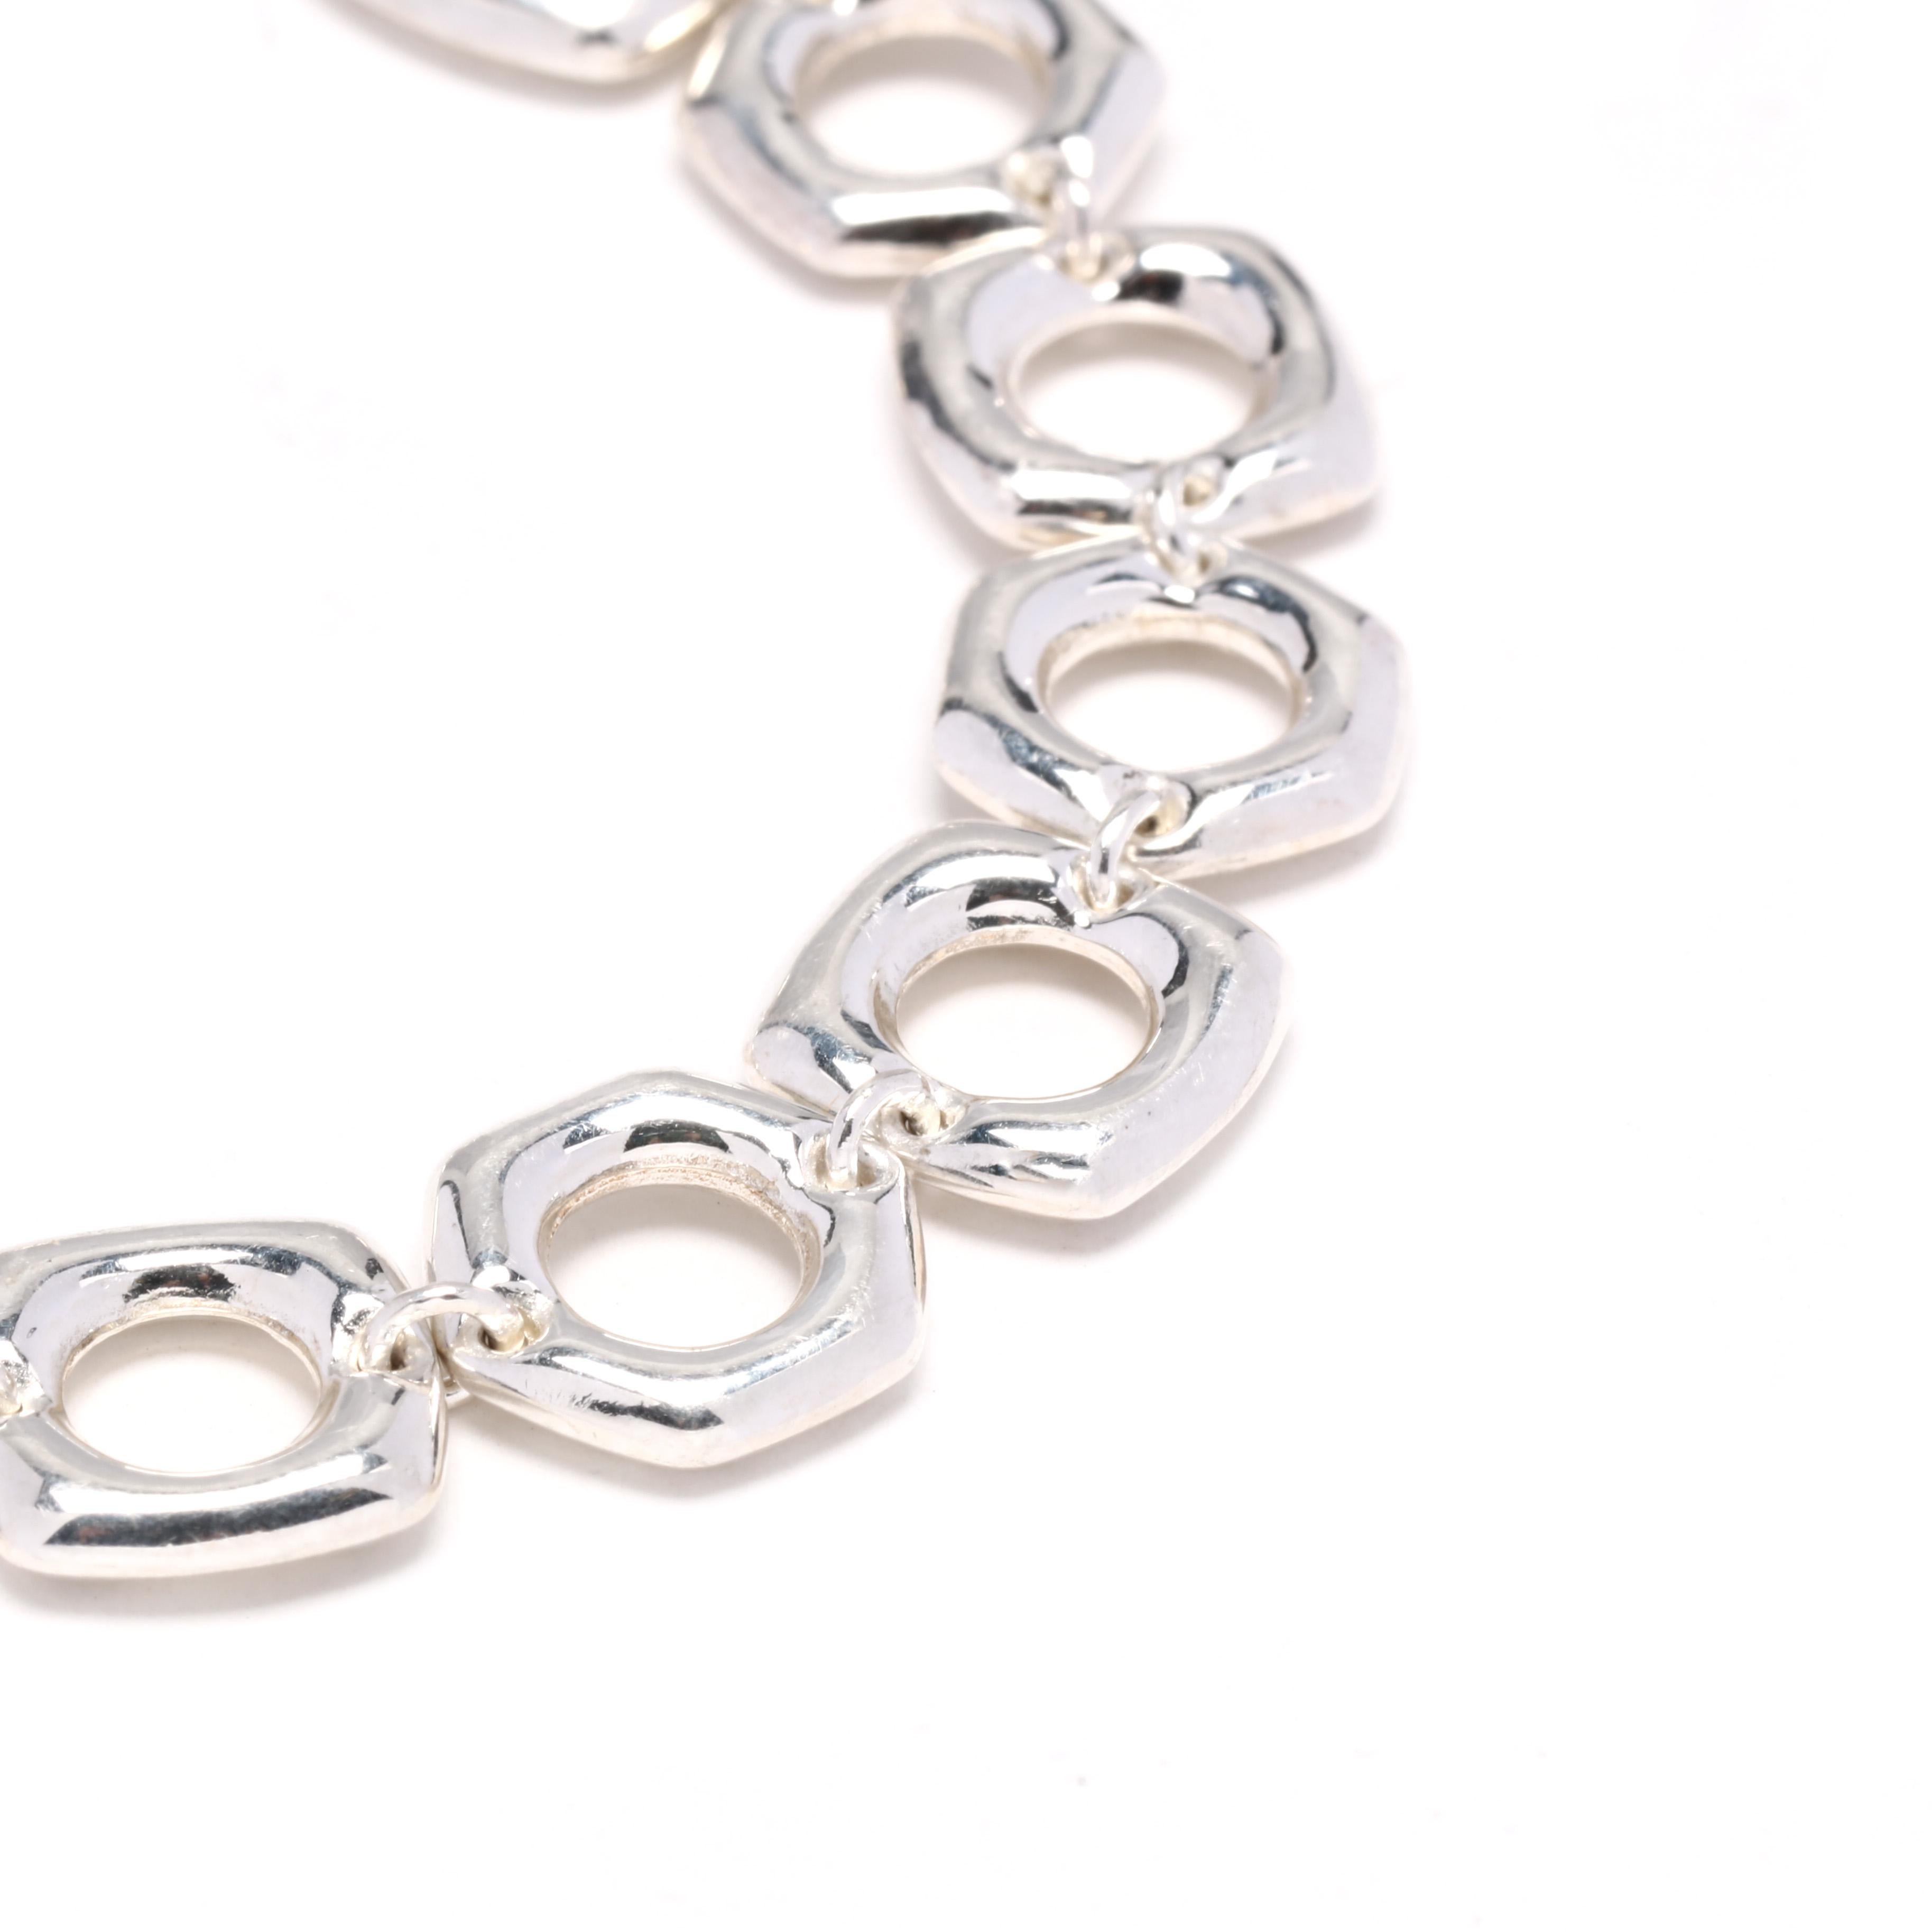 A sterling silver flat square link toggle bracelet. This bracelet features alternating freeform flat square and hexagonal links with a toggle clasp.


Length: 7 in.

Width: 10.75 mm

Weight: 11.8 grams

Ring Sizings & Modifications:
*Please reach